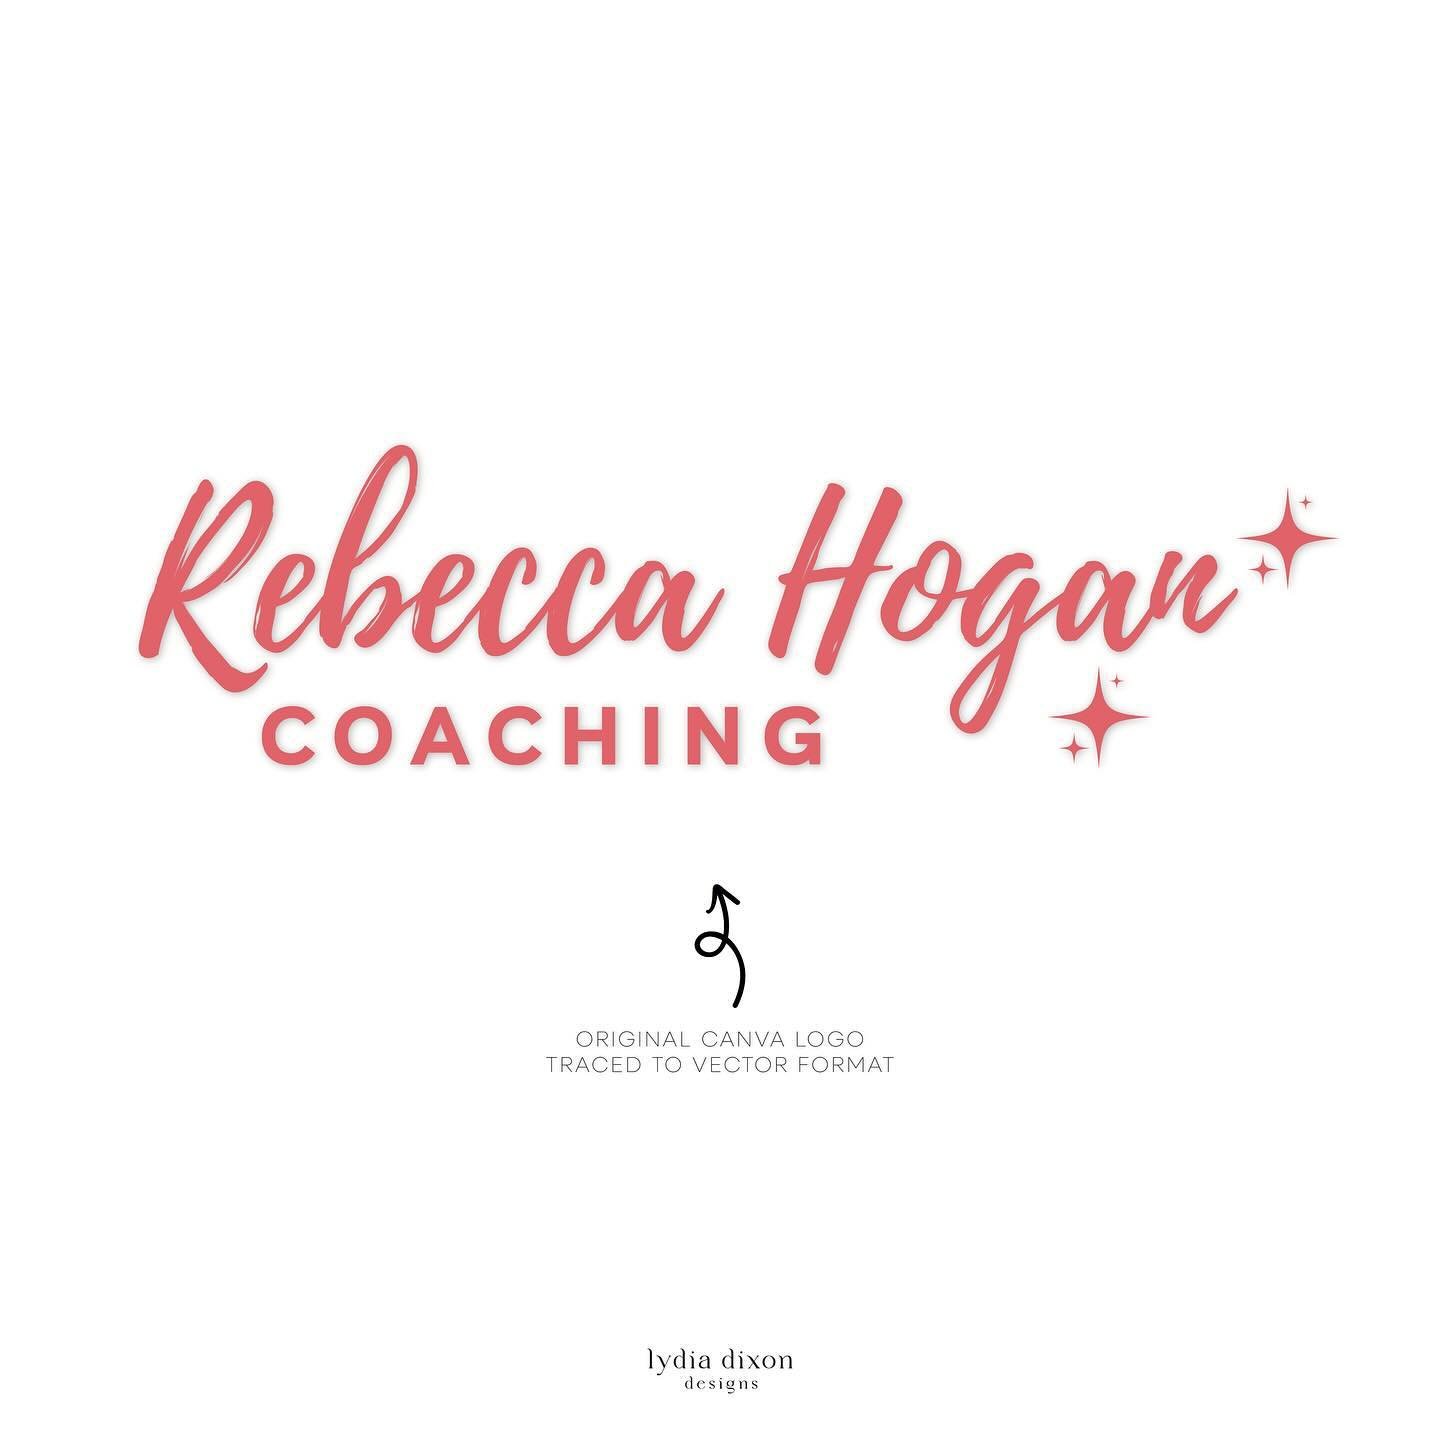 Branded Elements ✨

@rebeccahogancoach wanted to elevate her brand identity through social media platforms and email presence. We also designed a favicon to support the main primary branding. 

We love the bright and bold colours to showcase Rebecca 